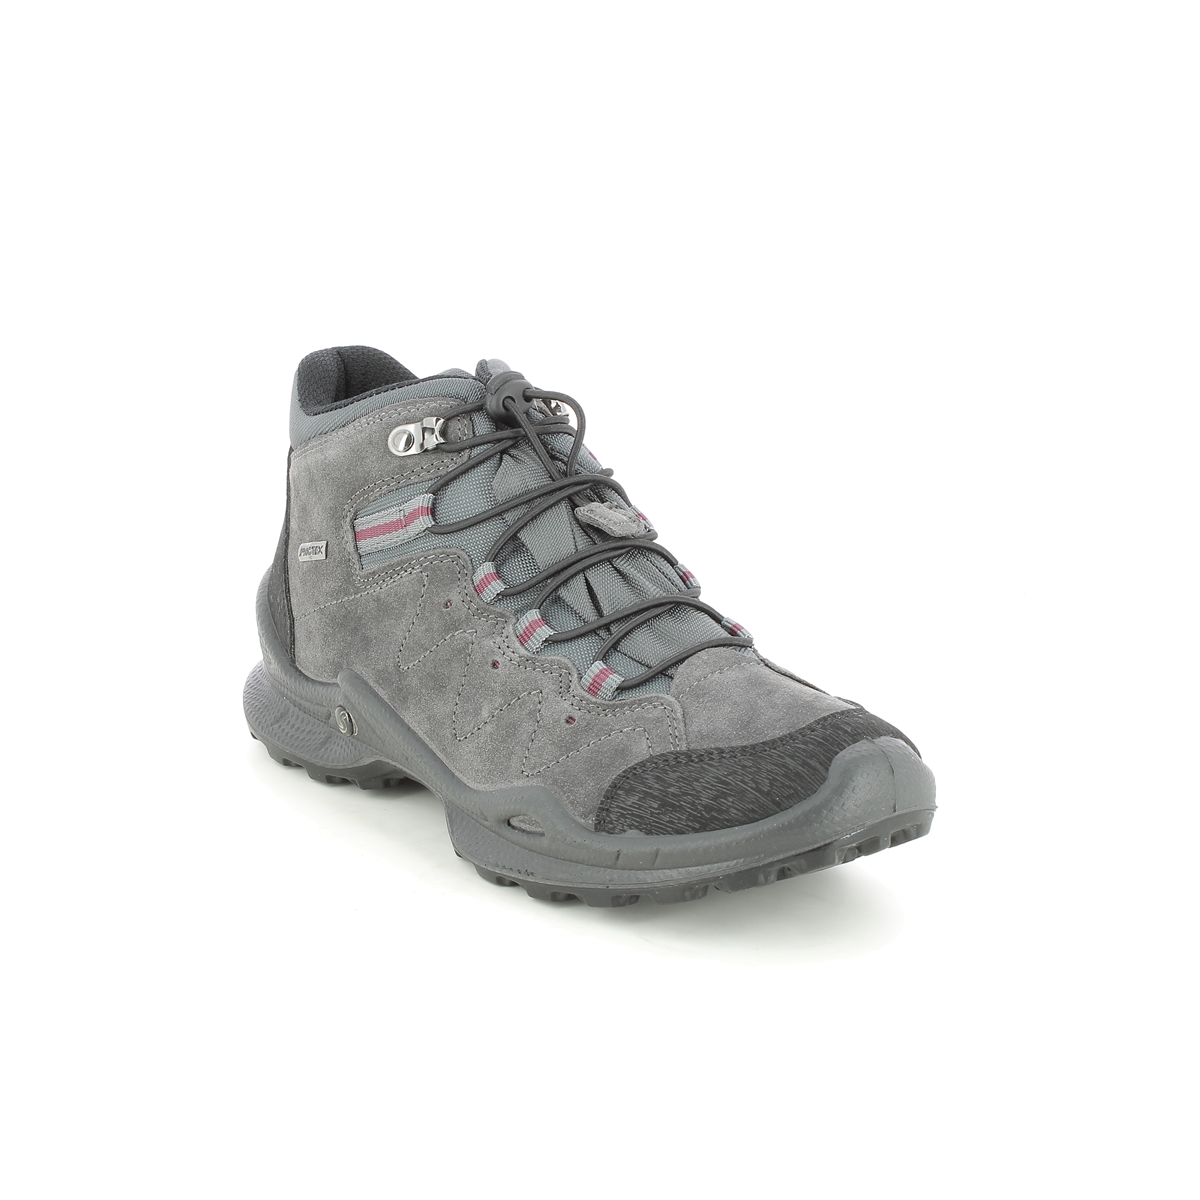 Imac Foxy   Boot Tex Grey Suede Womens Walking Boots 8819-7104018 In Size 38 In Plain Grey Suede